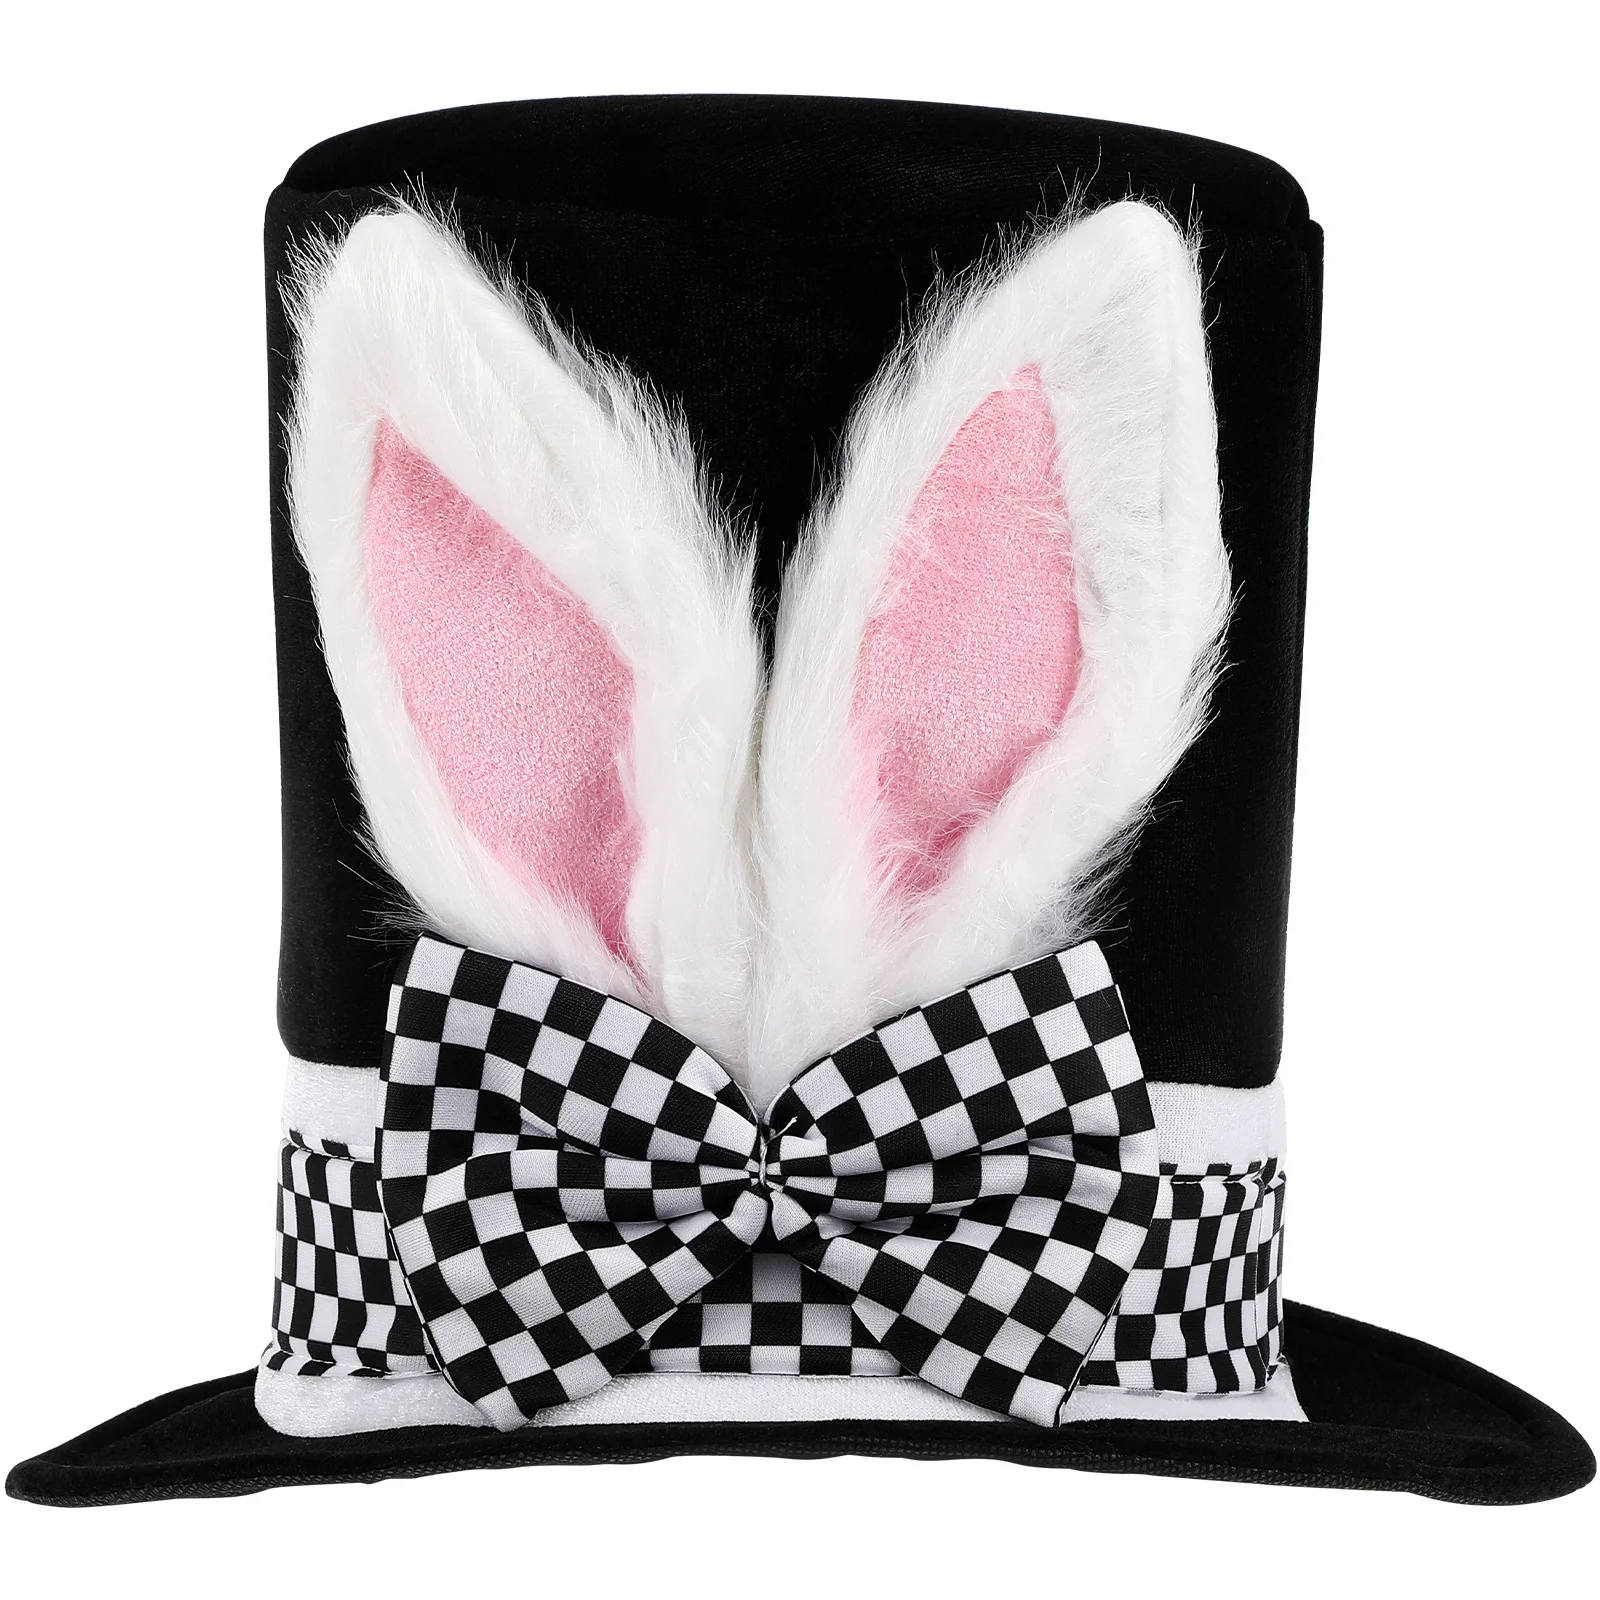 Mens Dress Hats Easter Hat White Rabbit Bunny Costume Adult Bunny Cosplay Hat Bunny Ear Topper Hat Man